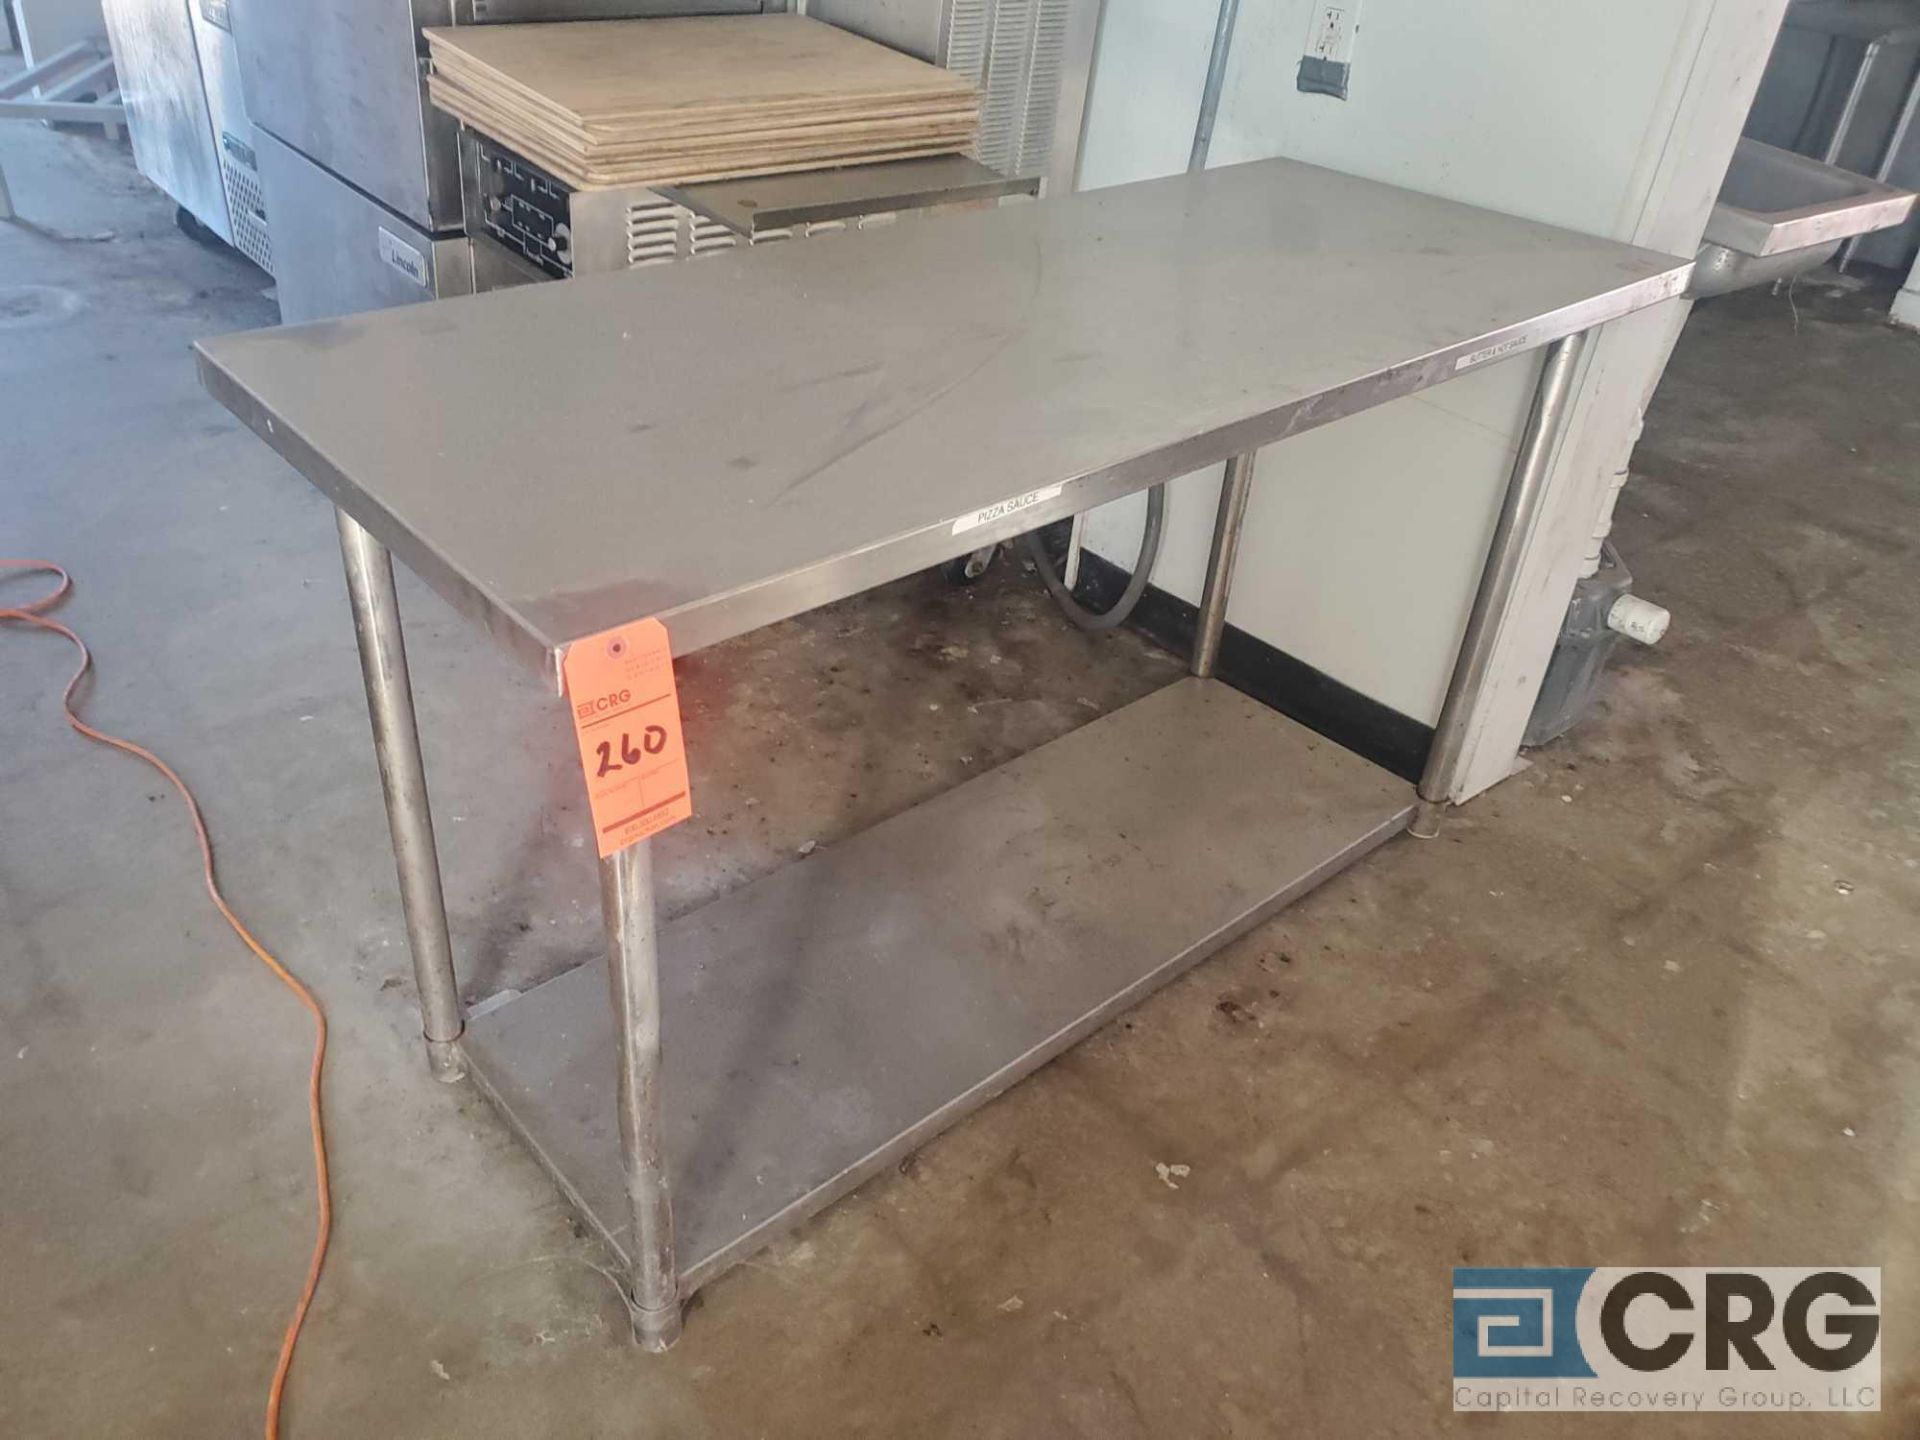 Lot of (4) asst stainless steel work tables including (2) 5 foot, (1) 4 foot and (1) 3 foot